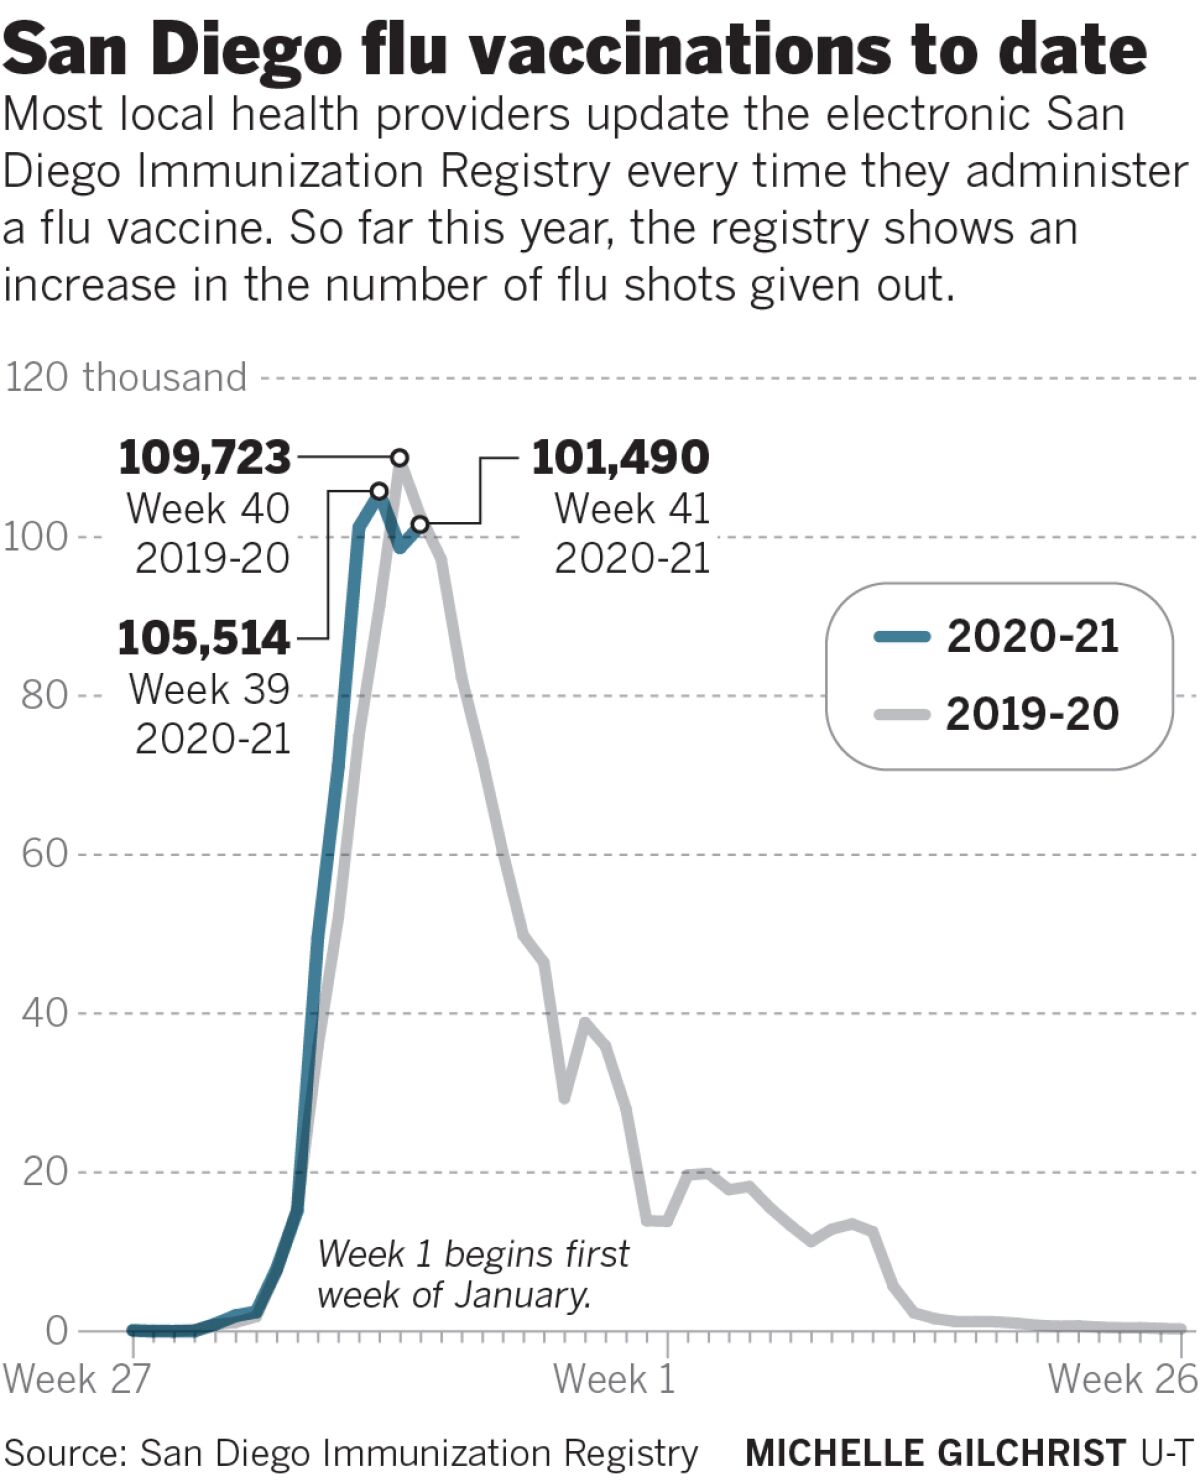 San Diego flu vaccinations to date